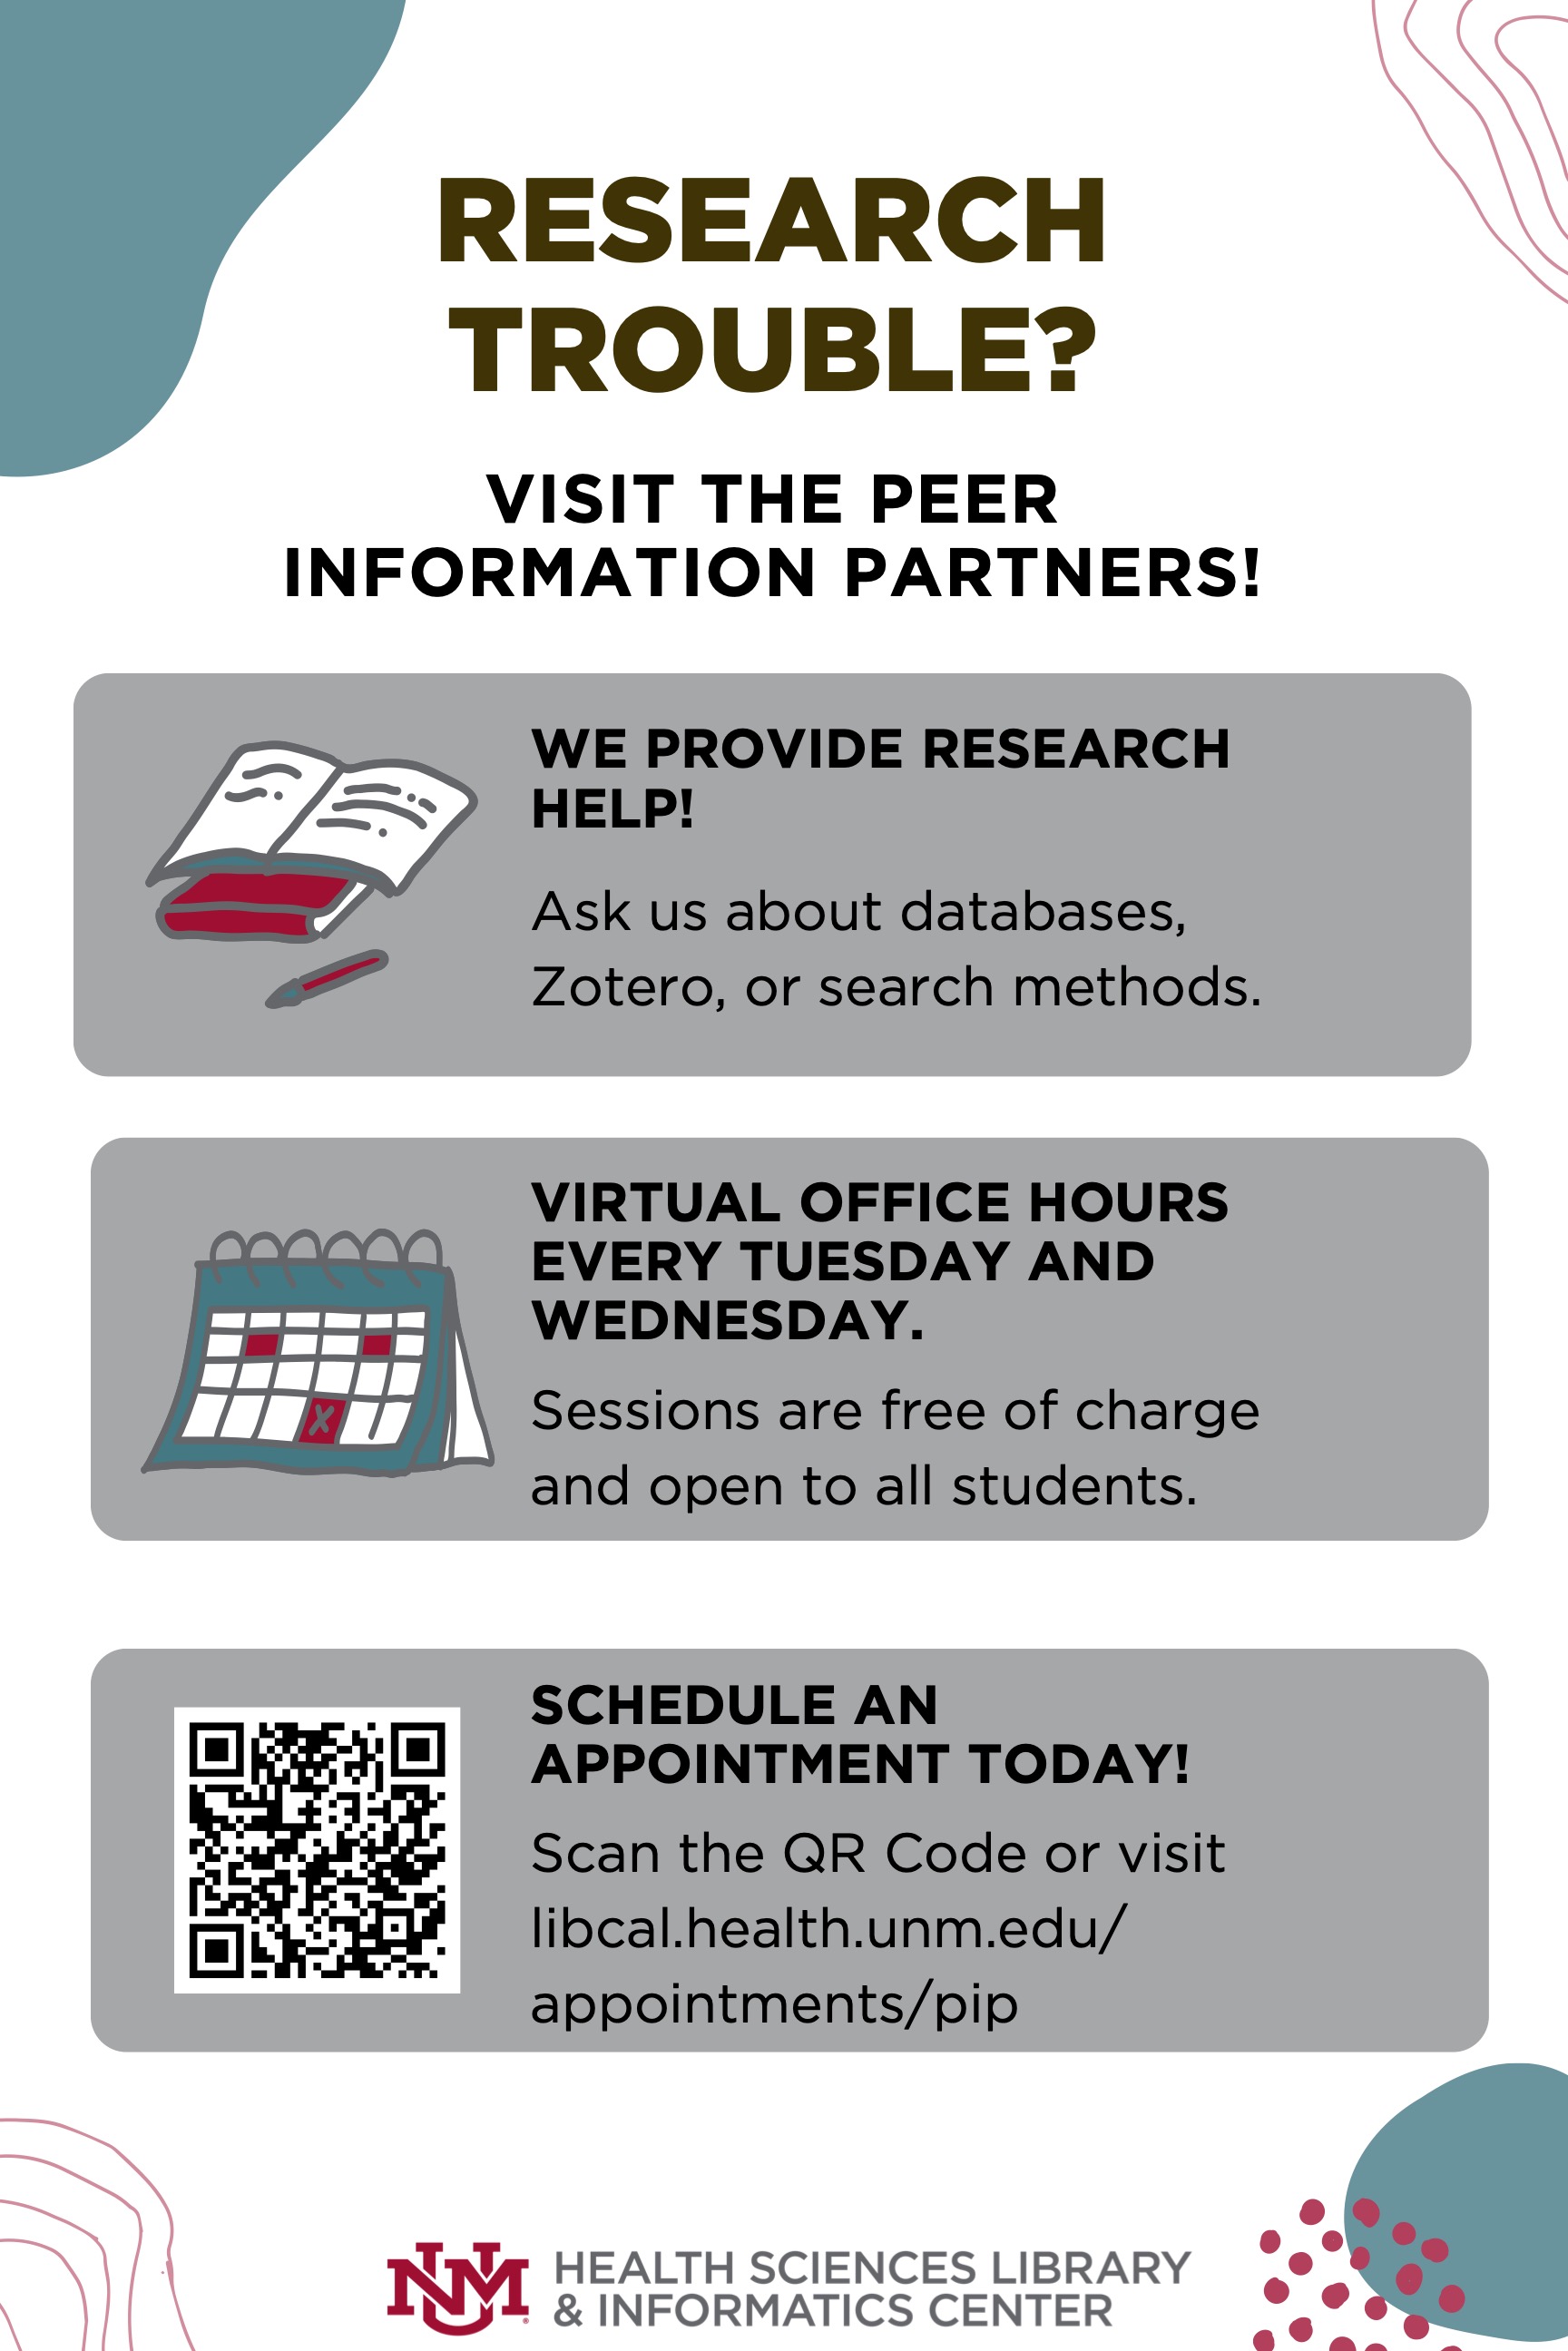 Flyer for research assistance at Peer Information Partners, sessions are free of charge and virtual office hours every Tuesday and Wednesday. Visit libcal.health.unm.edu/appointments/pip for more information